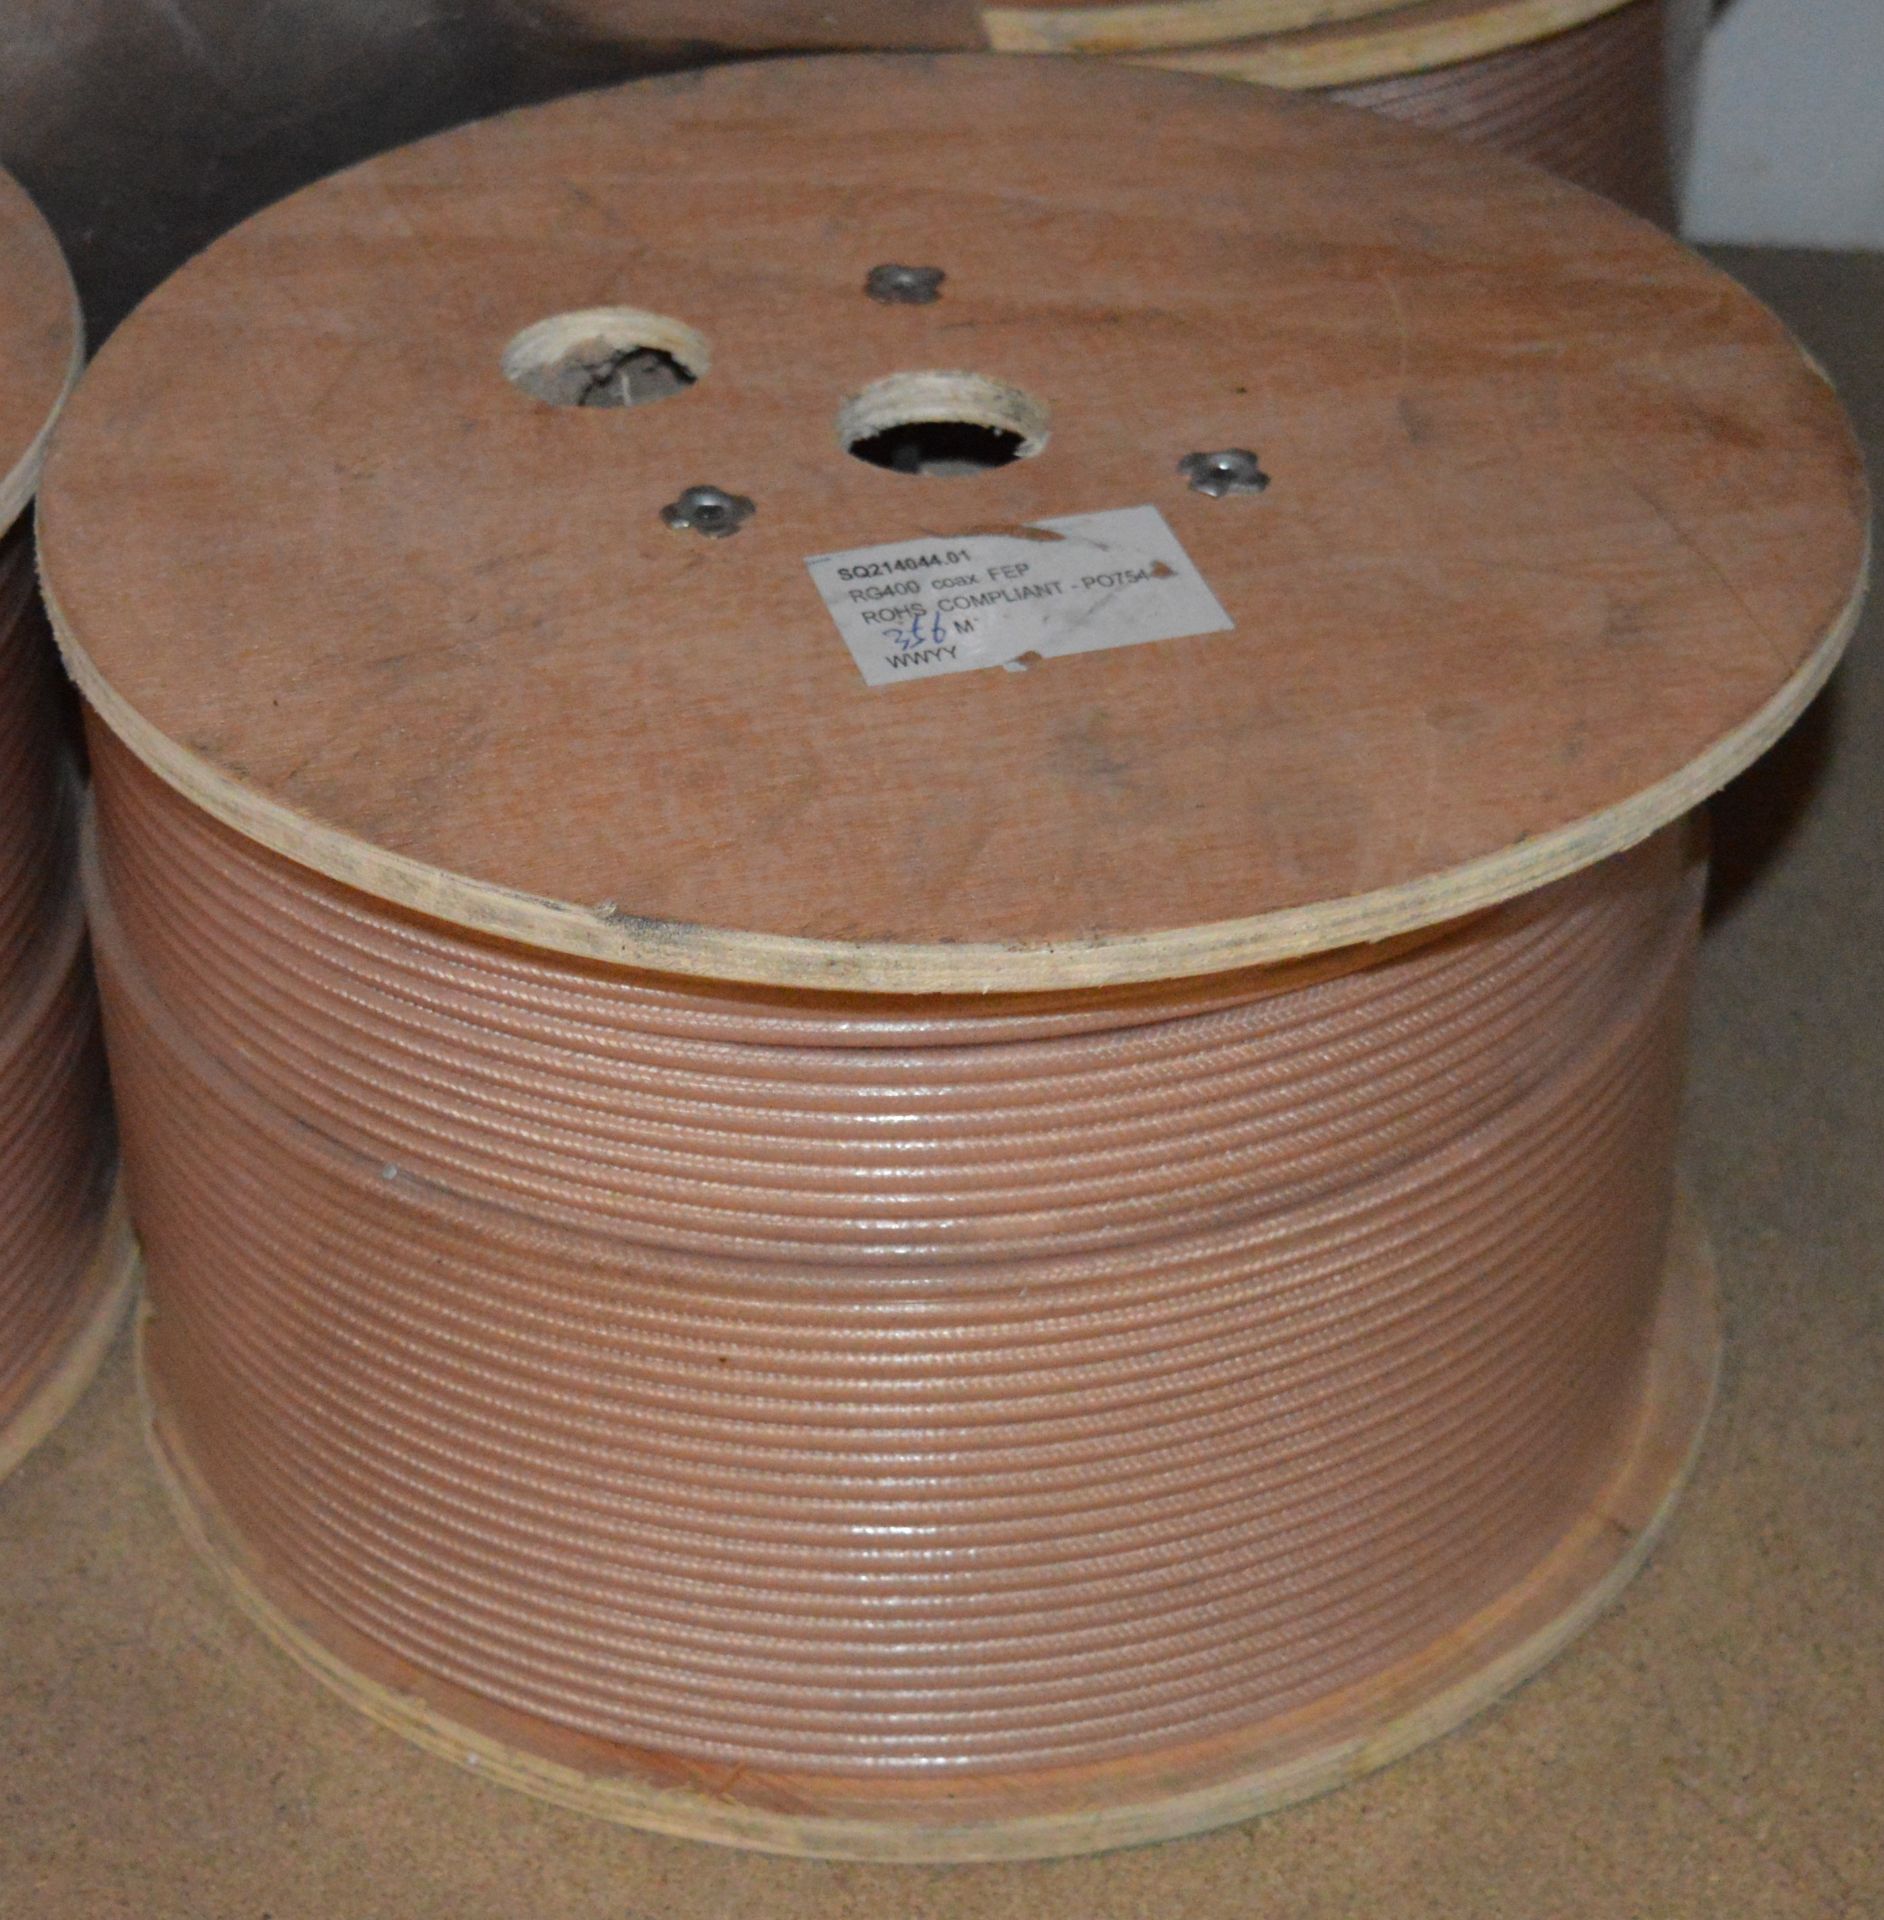 356 x Meter Reel RG400 Coax FEP Cable - Brand New Stock - ROHS Compliant - Brand New Stock - CL300 - - Image 4 of 5